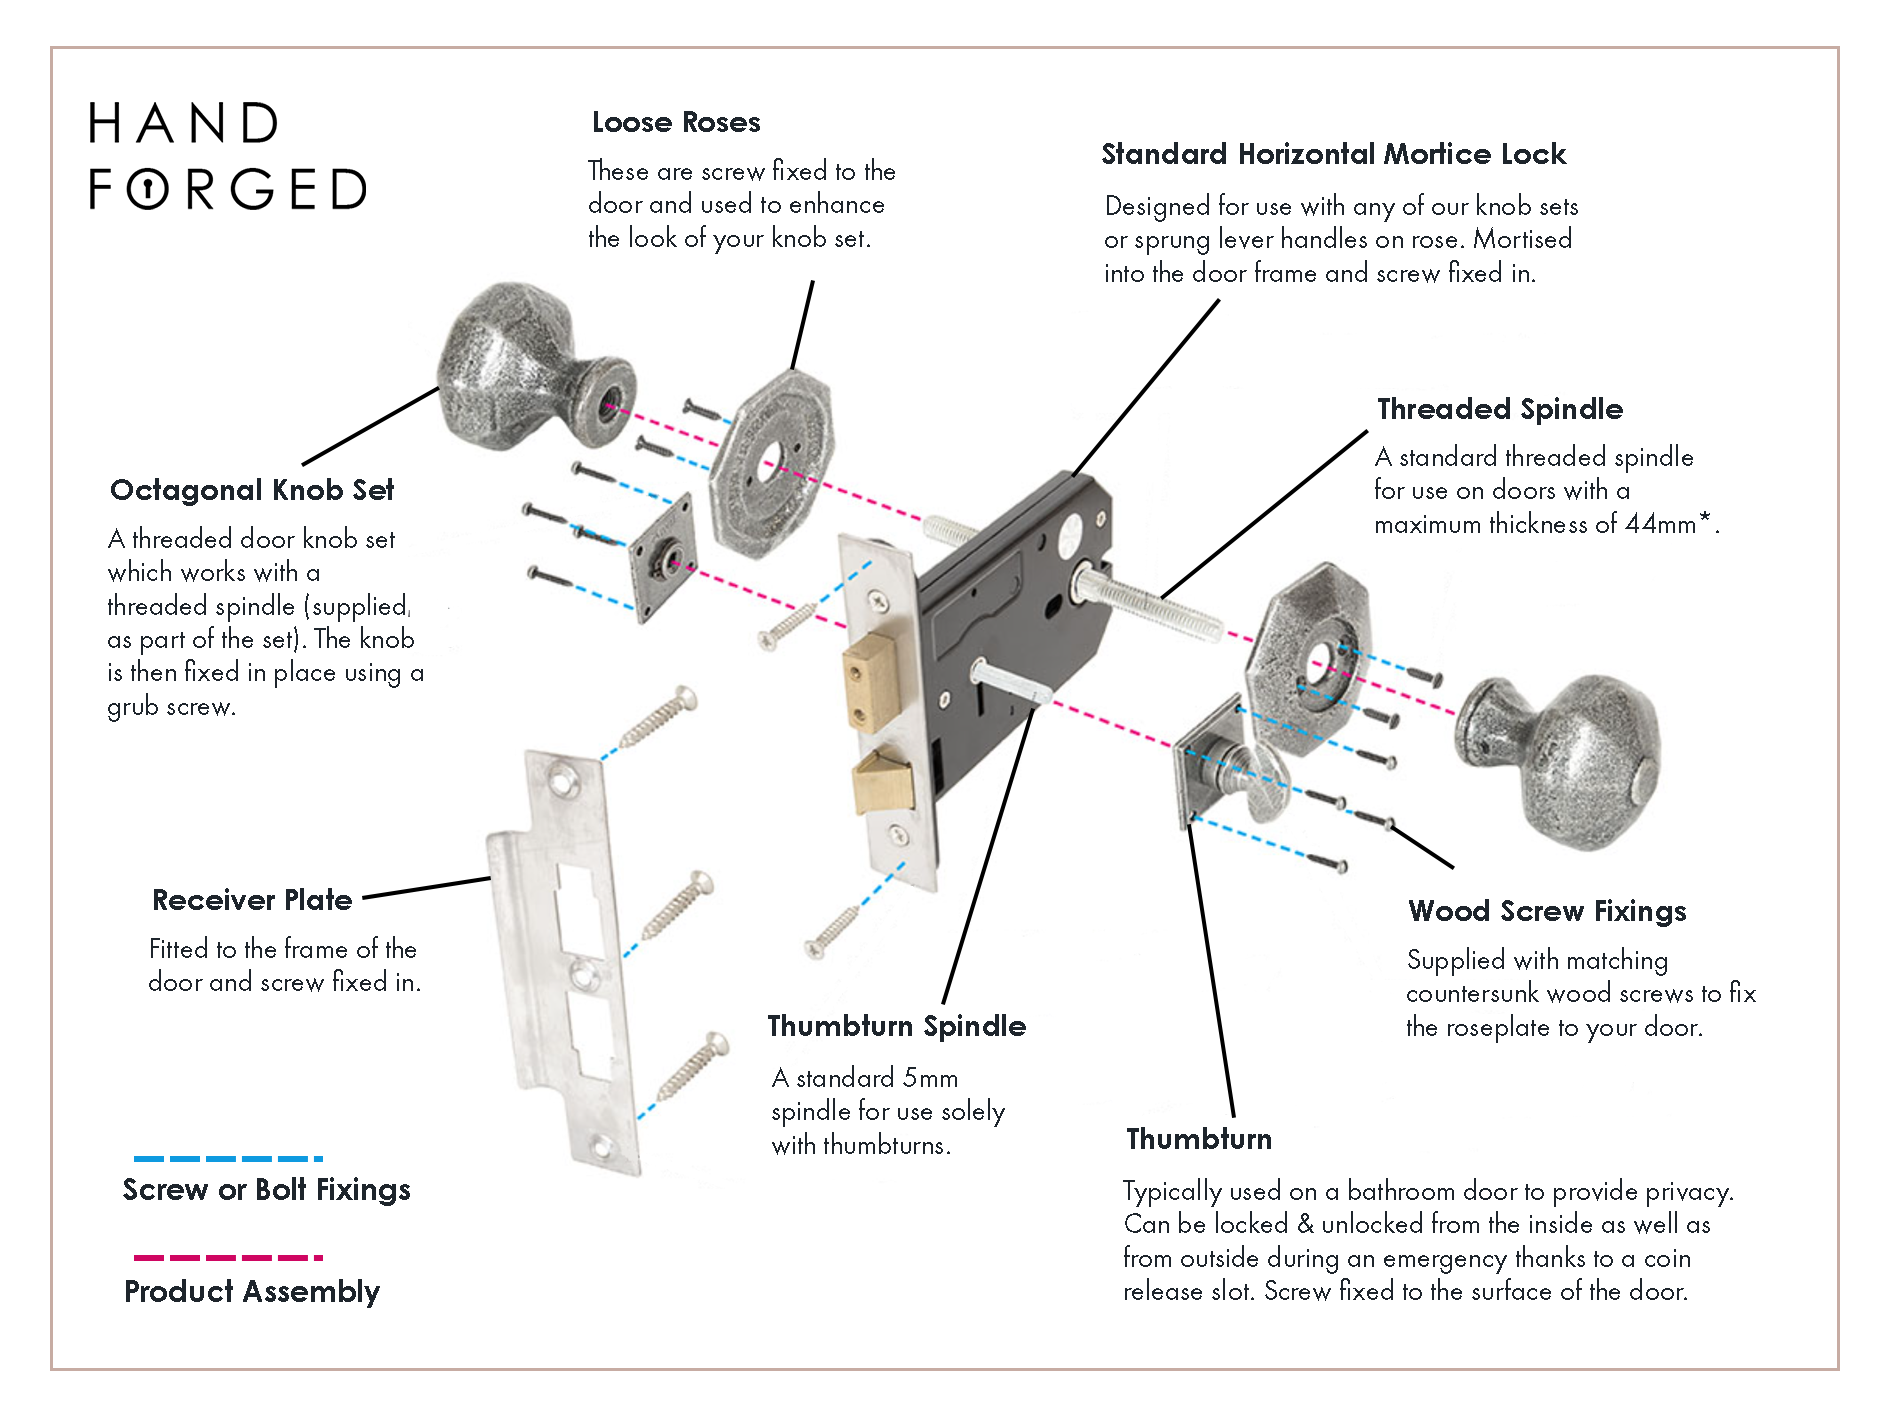 Exploded diagram of a standard horizontal mortice lock